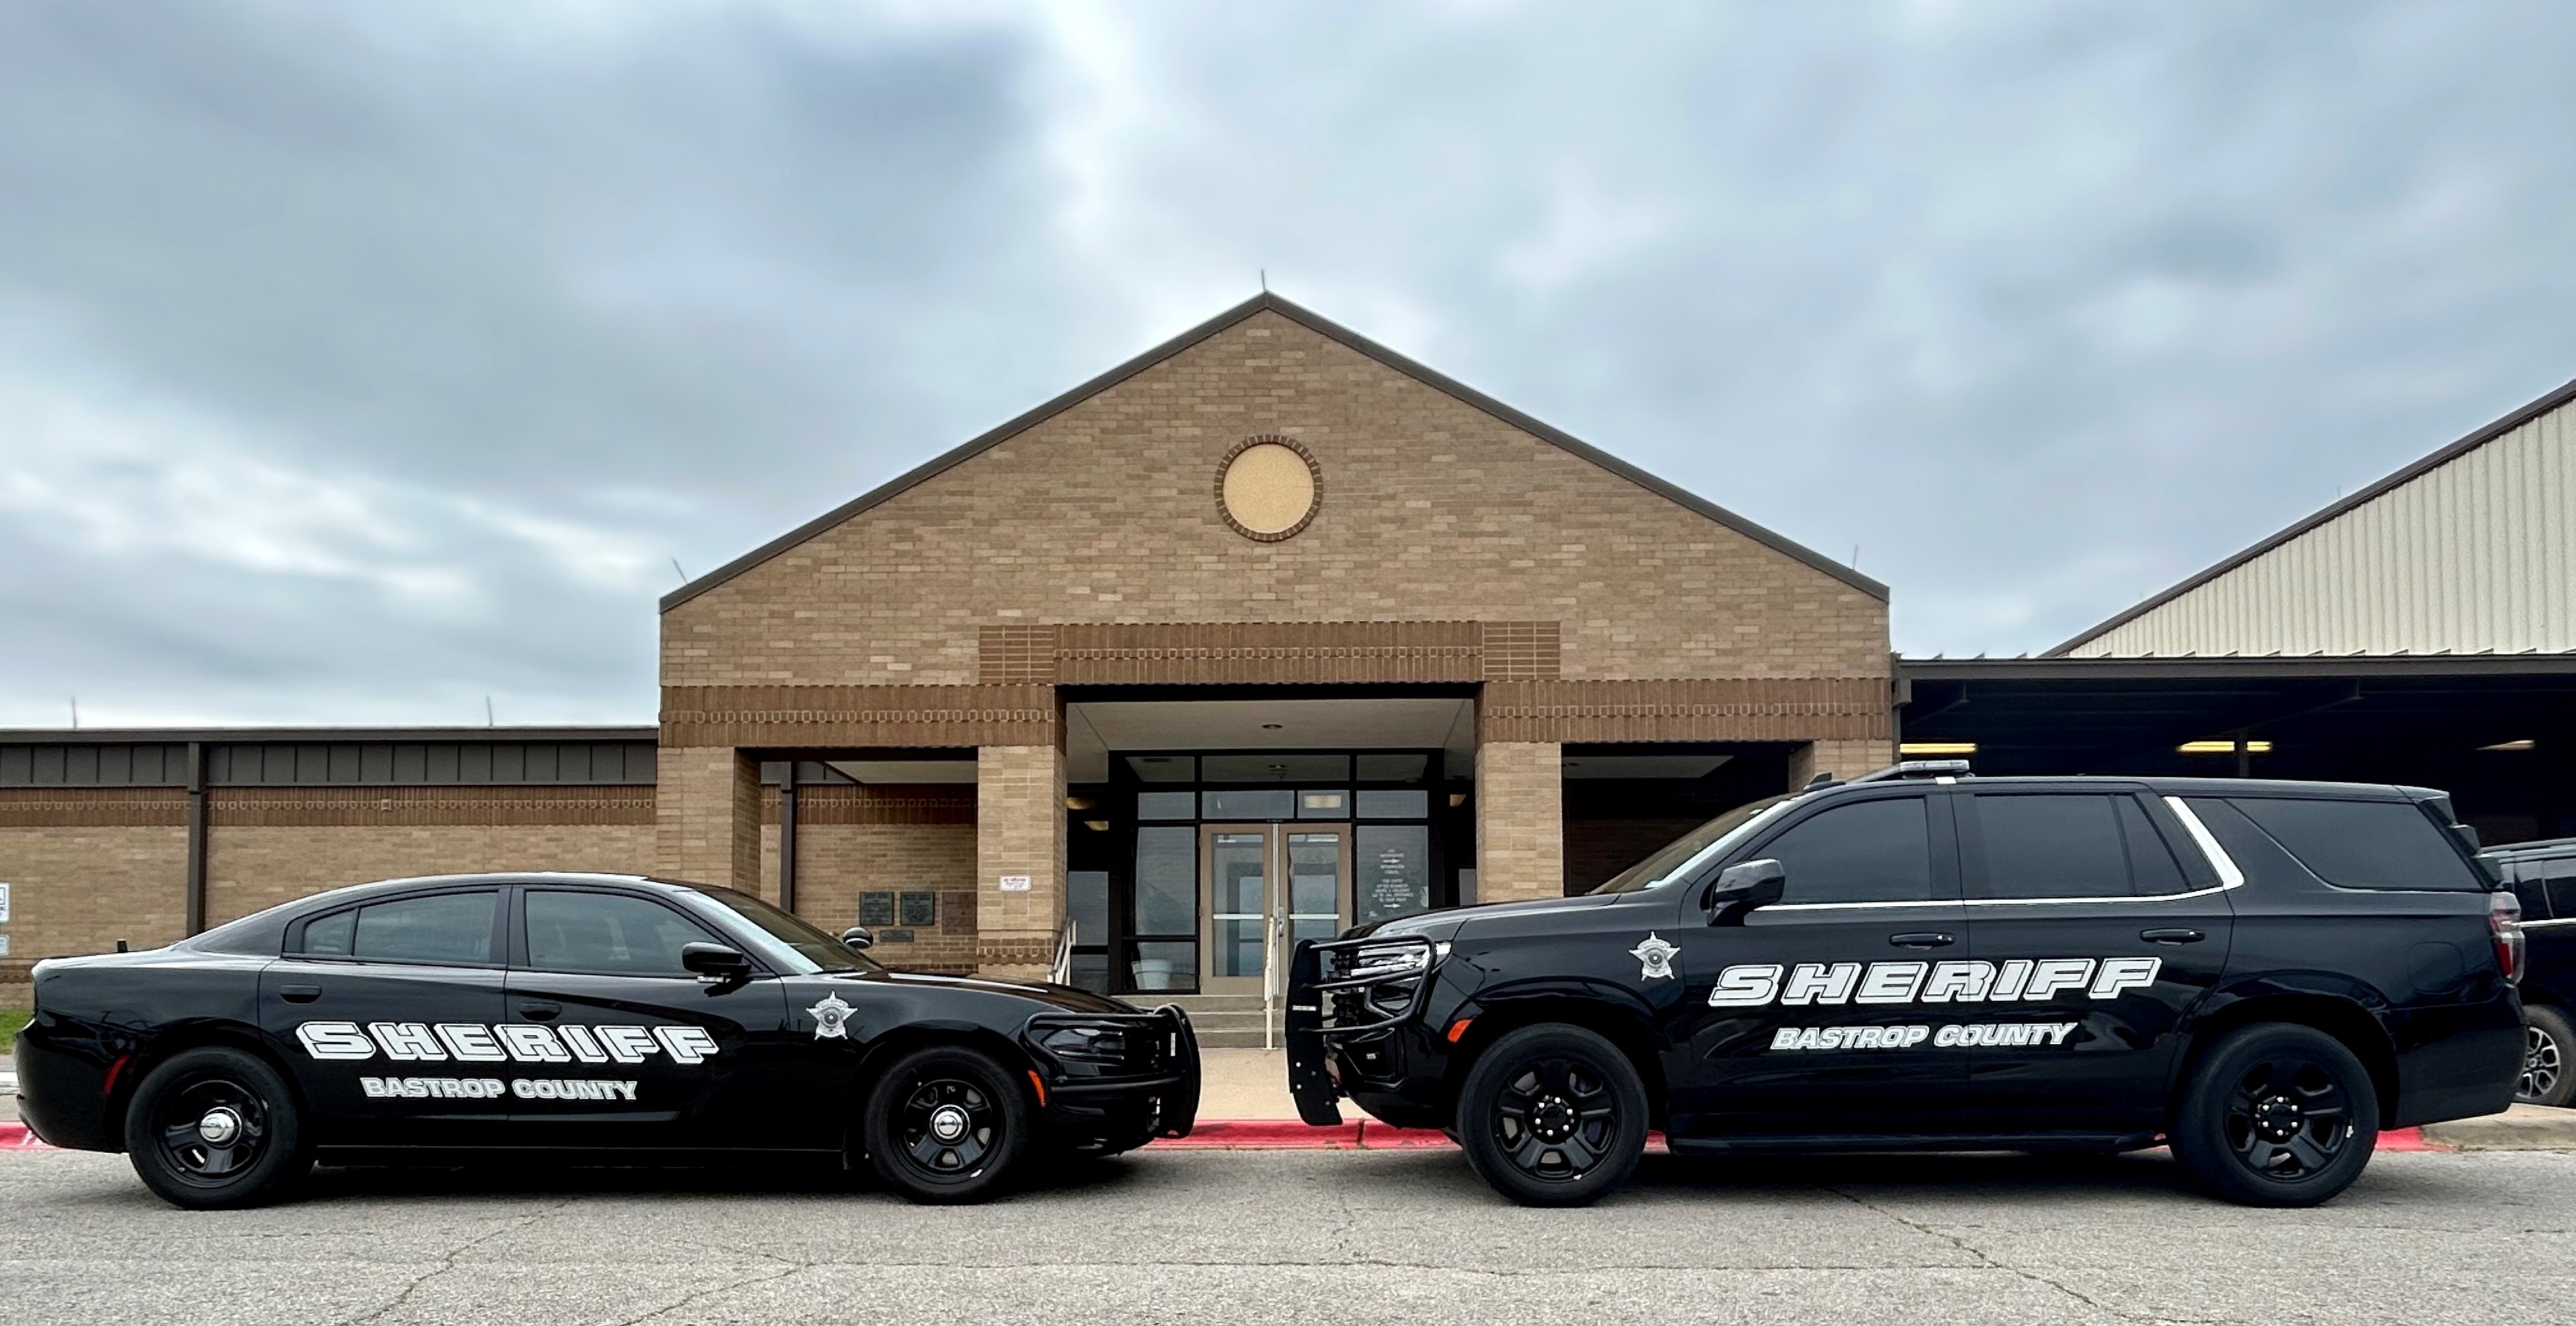 Image of Bastrop County Sheriff's Office